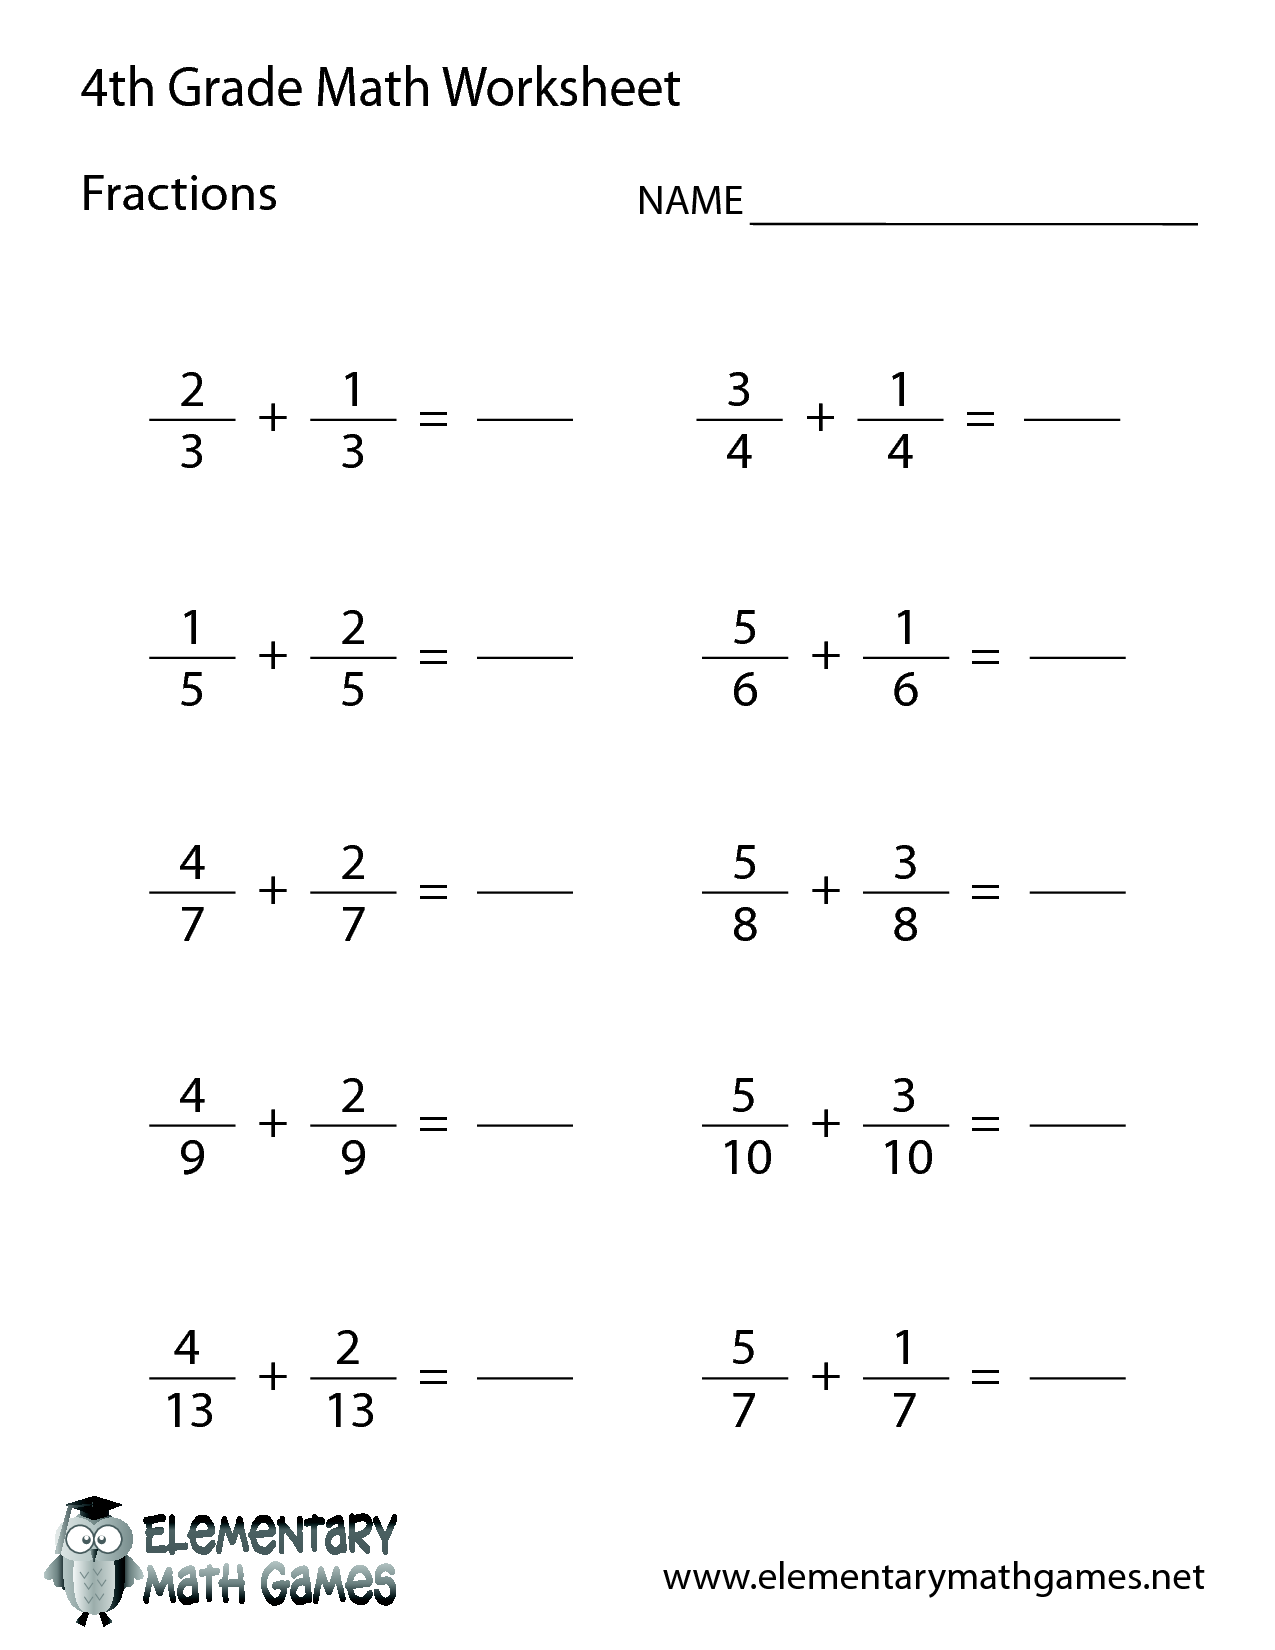 4th Grade Math Worksheets for Free